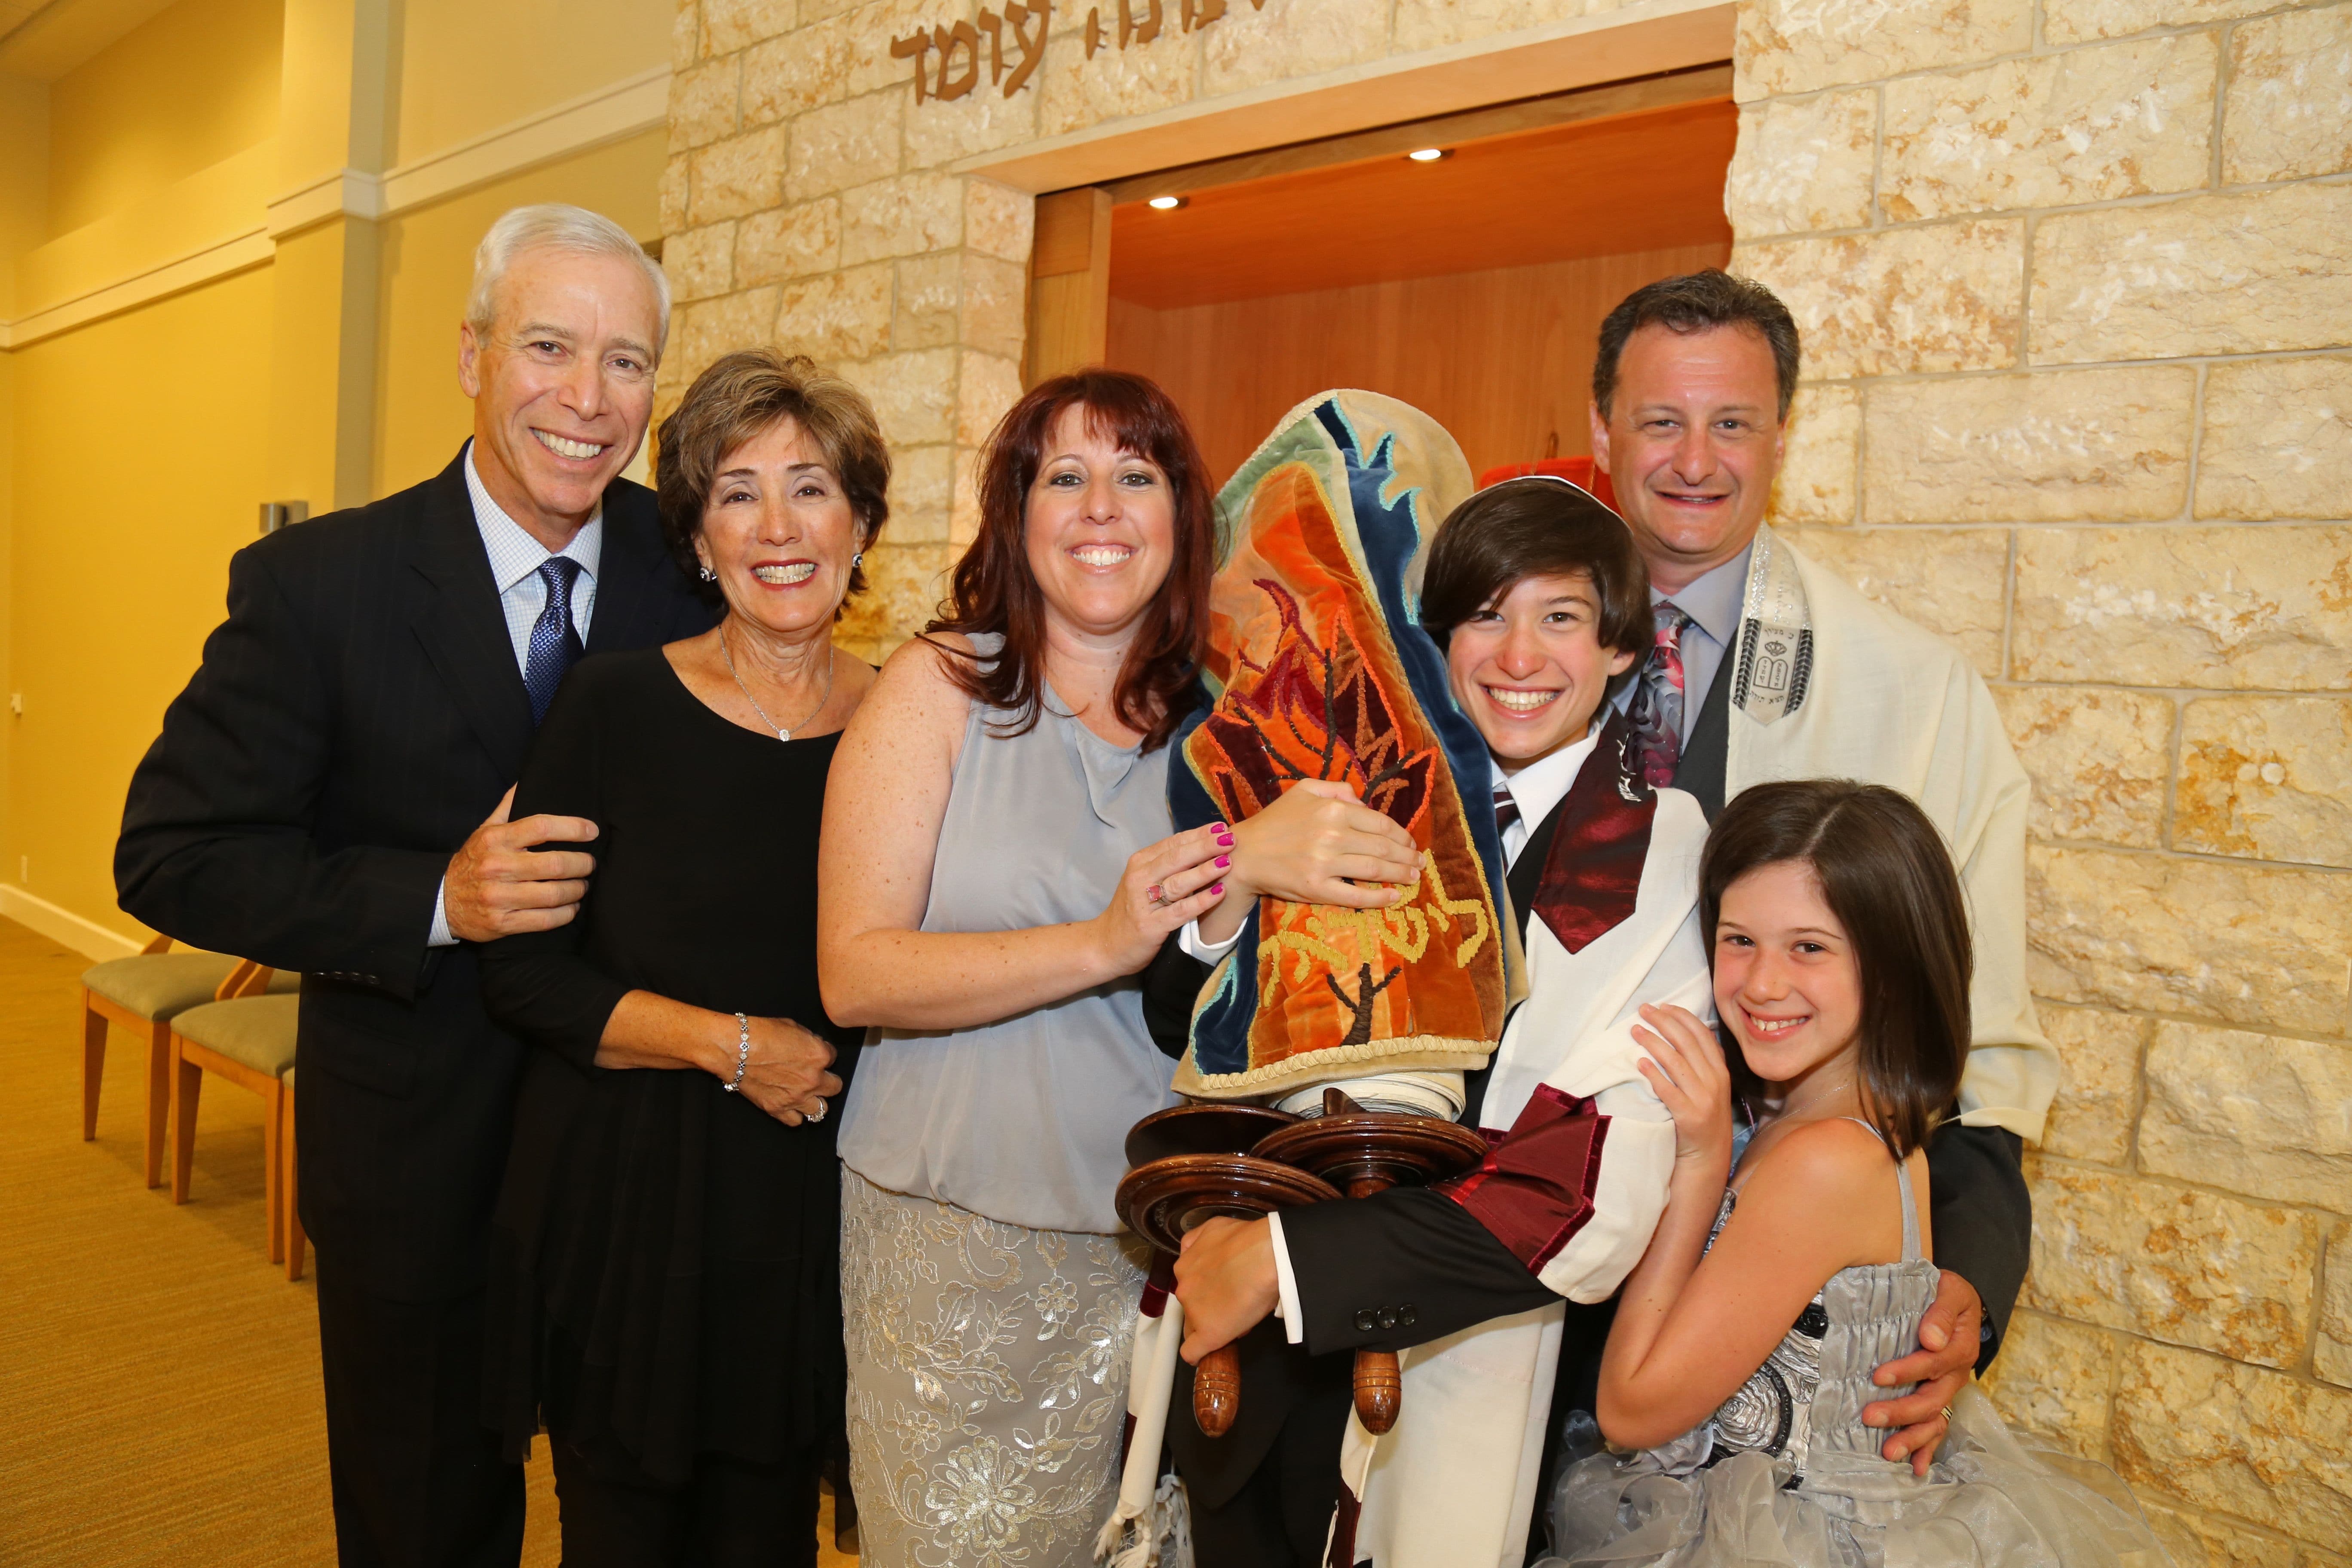 Bucks County Bar Mitzvah Family Portraits. Photo taken by Tylerstar Productions at Temple Judea in Furlong, PA.